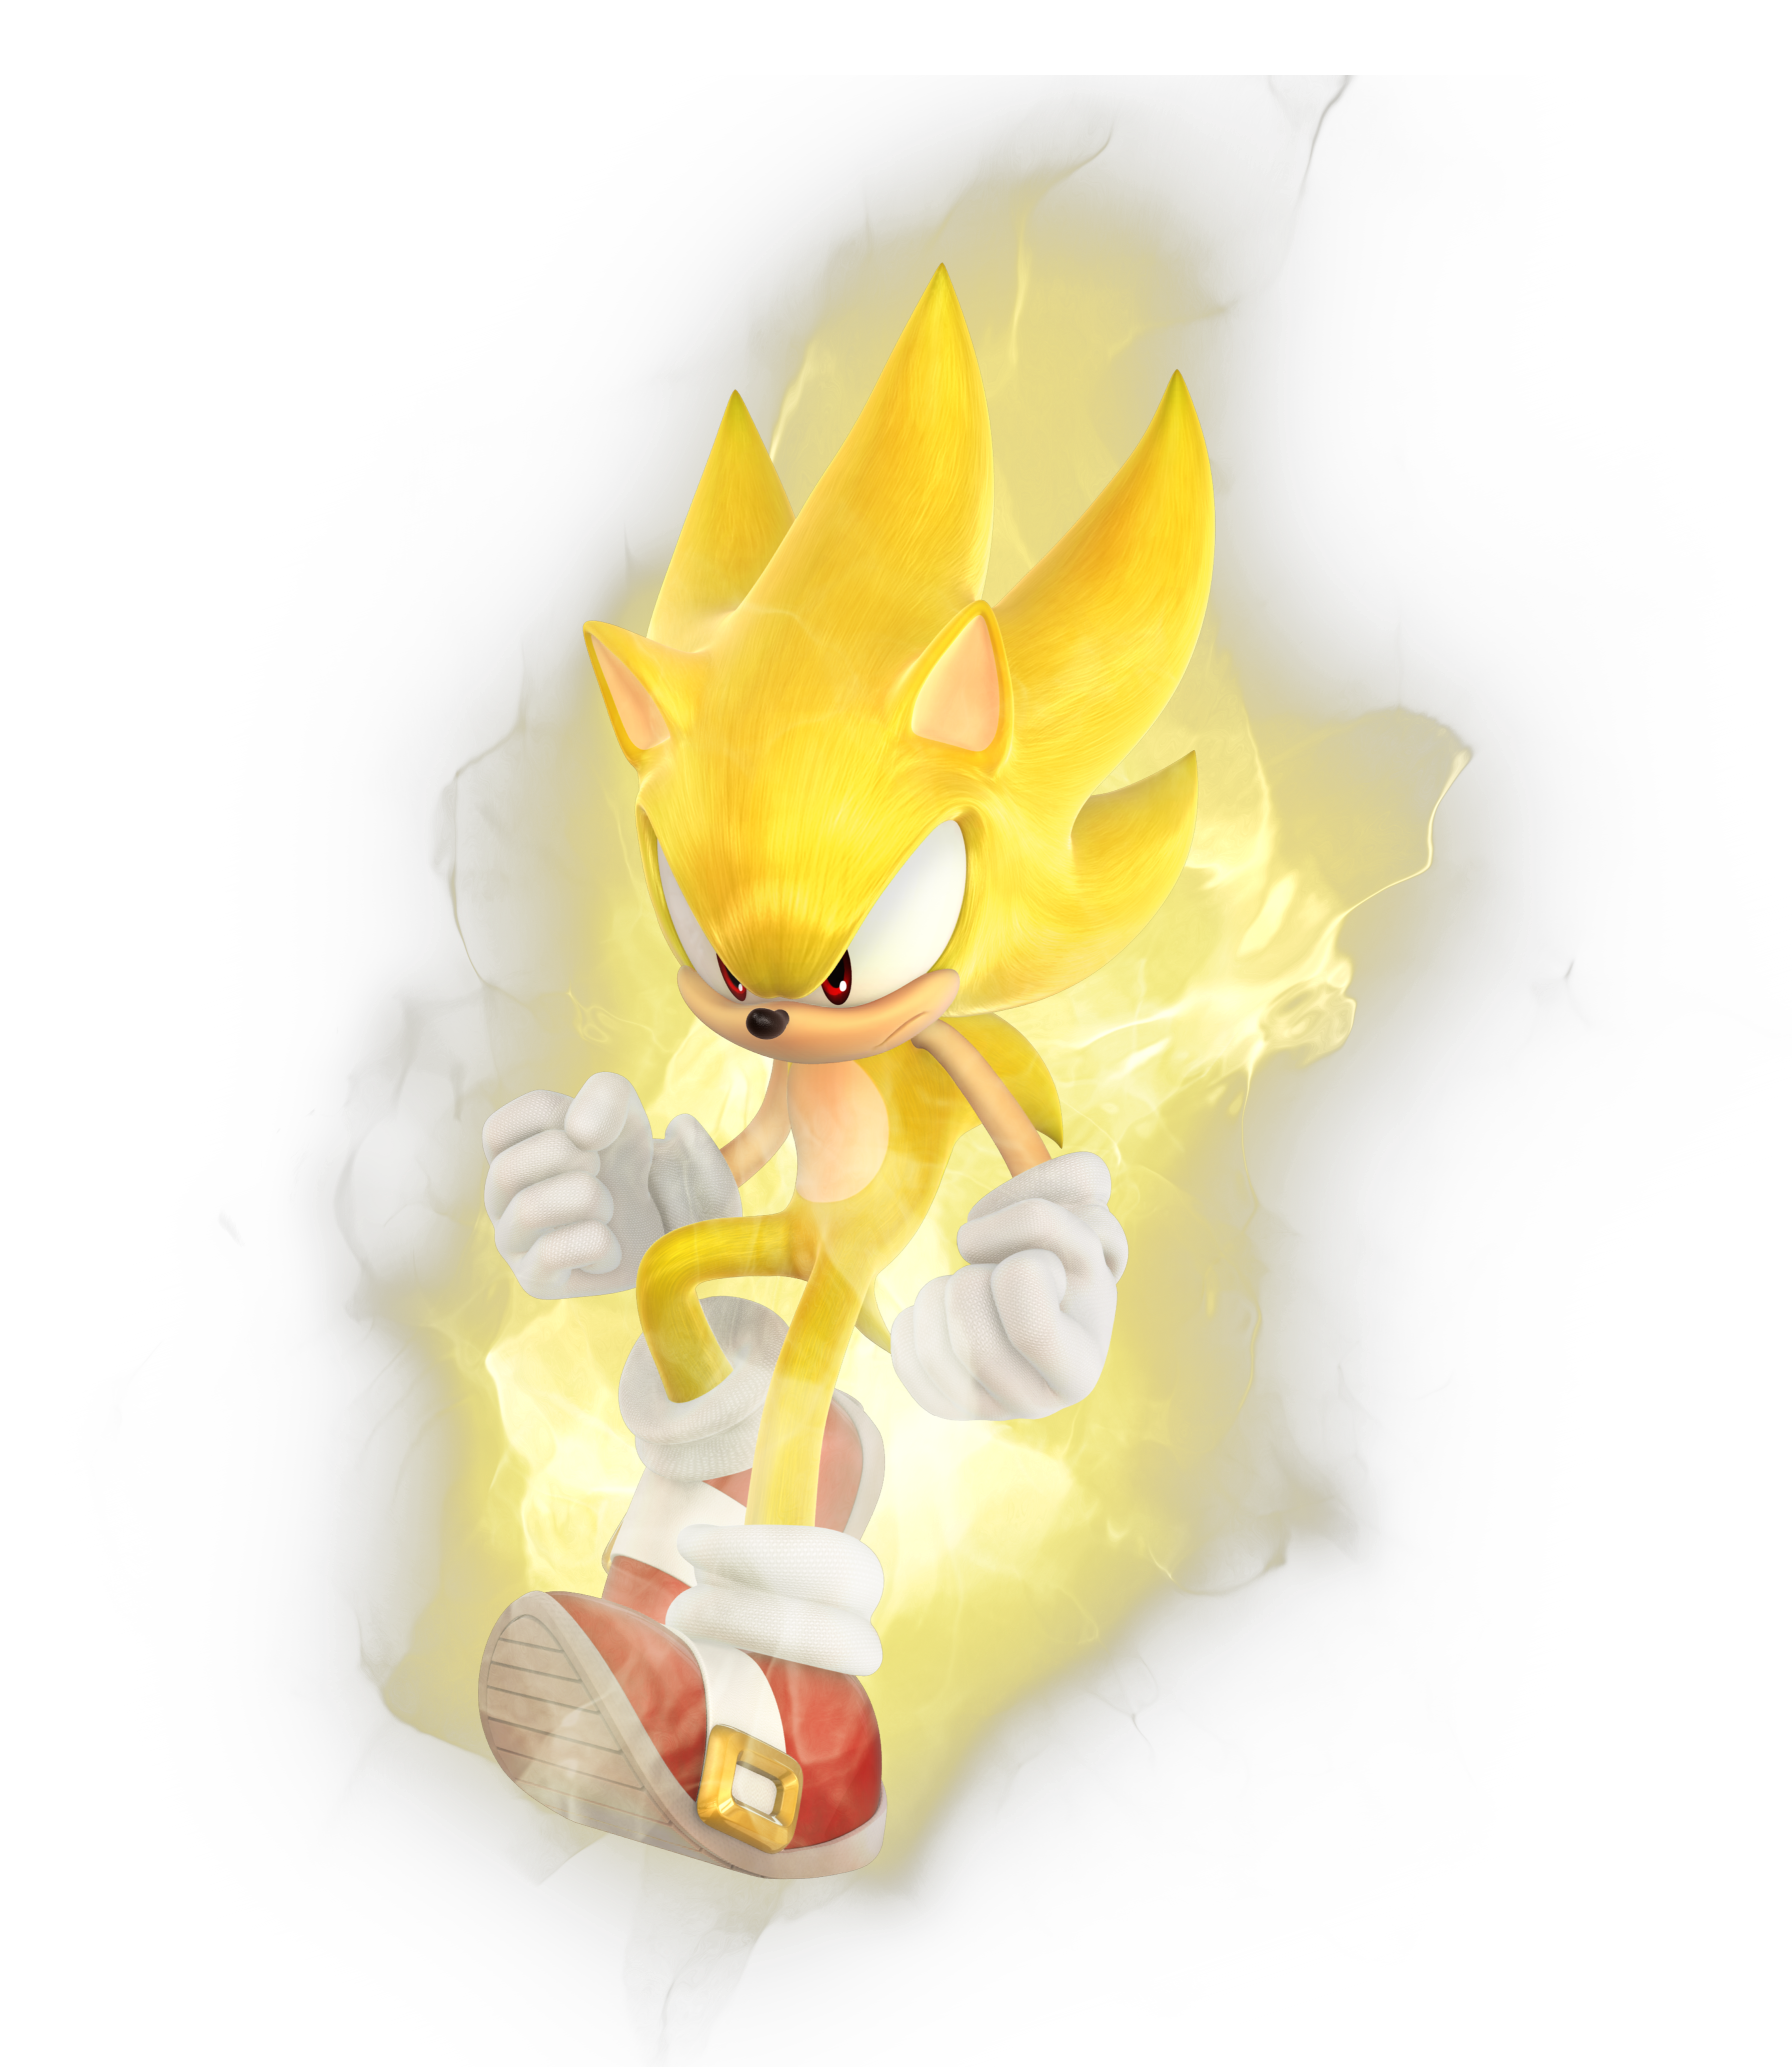 sonic 2 style sonic mugen old version